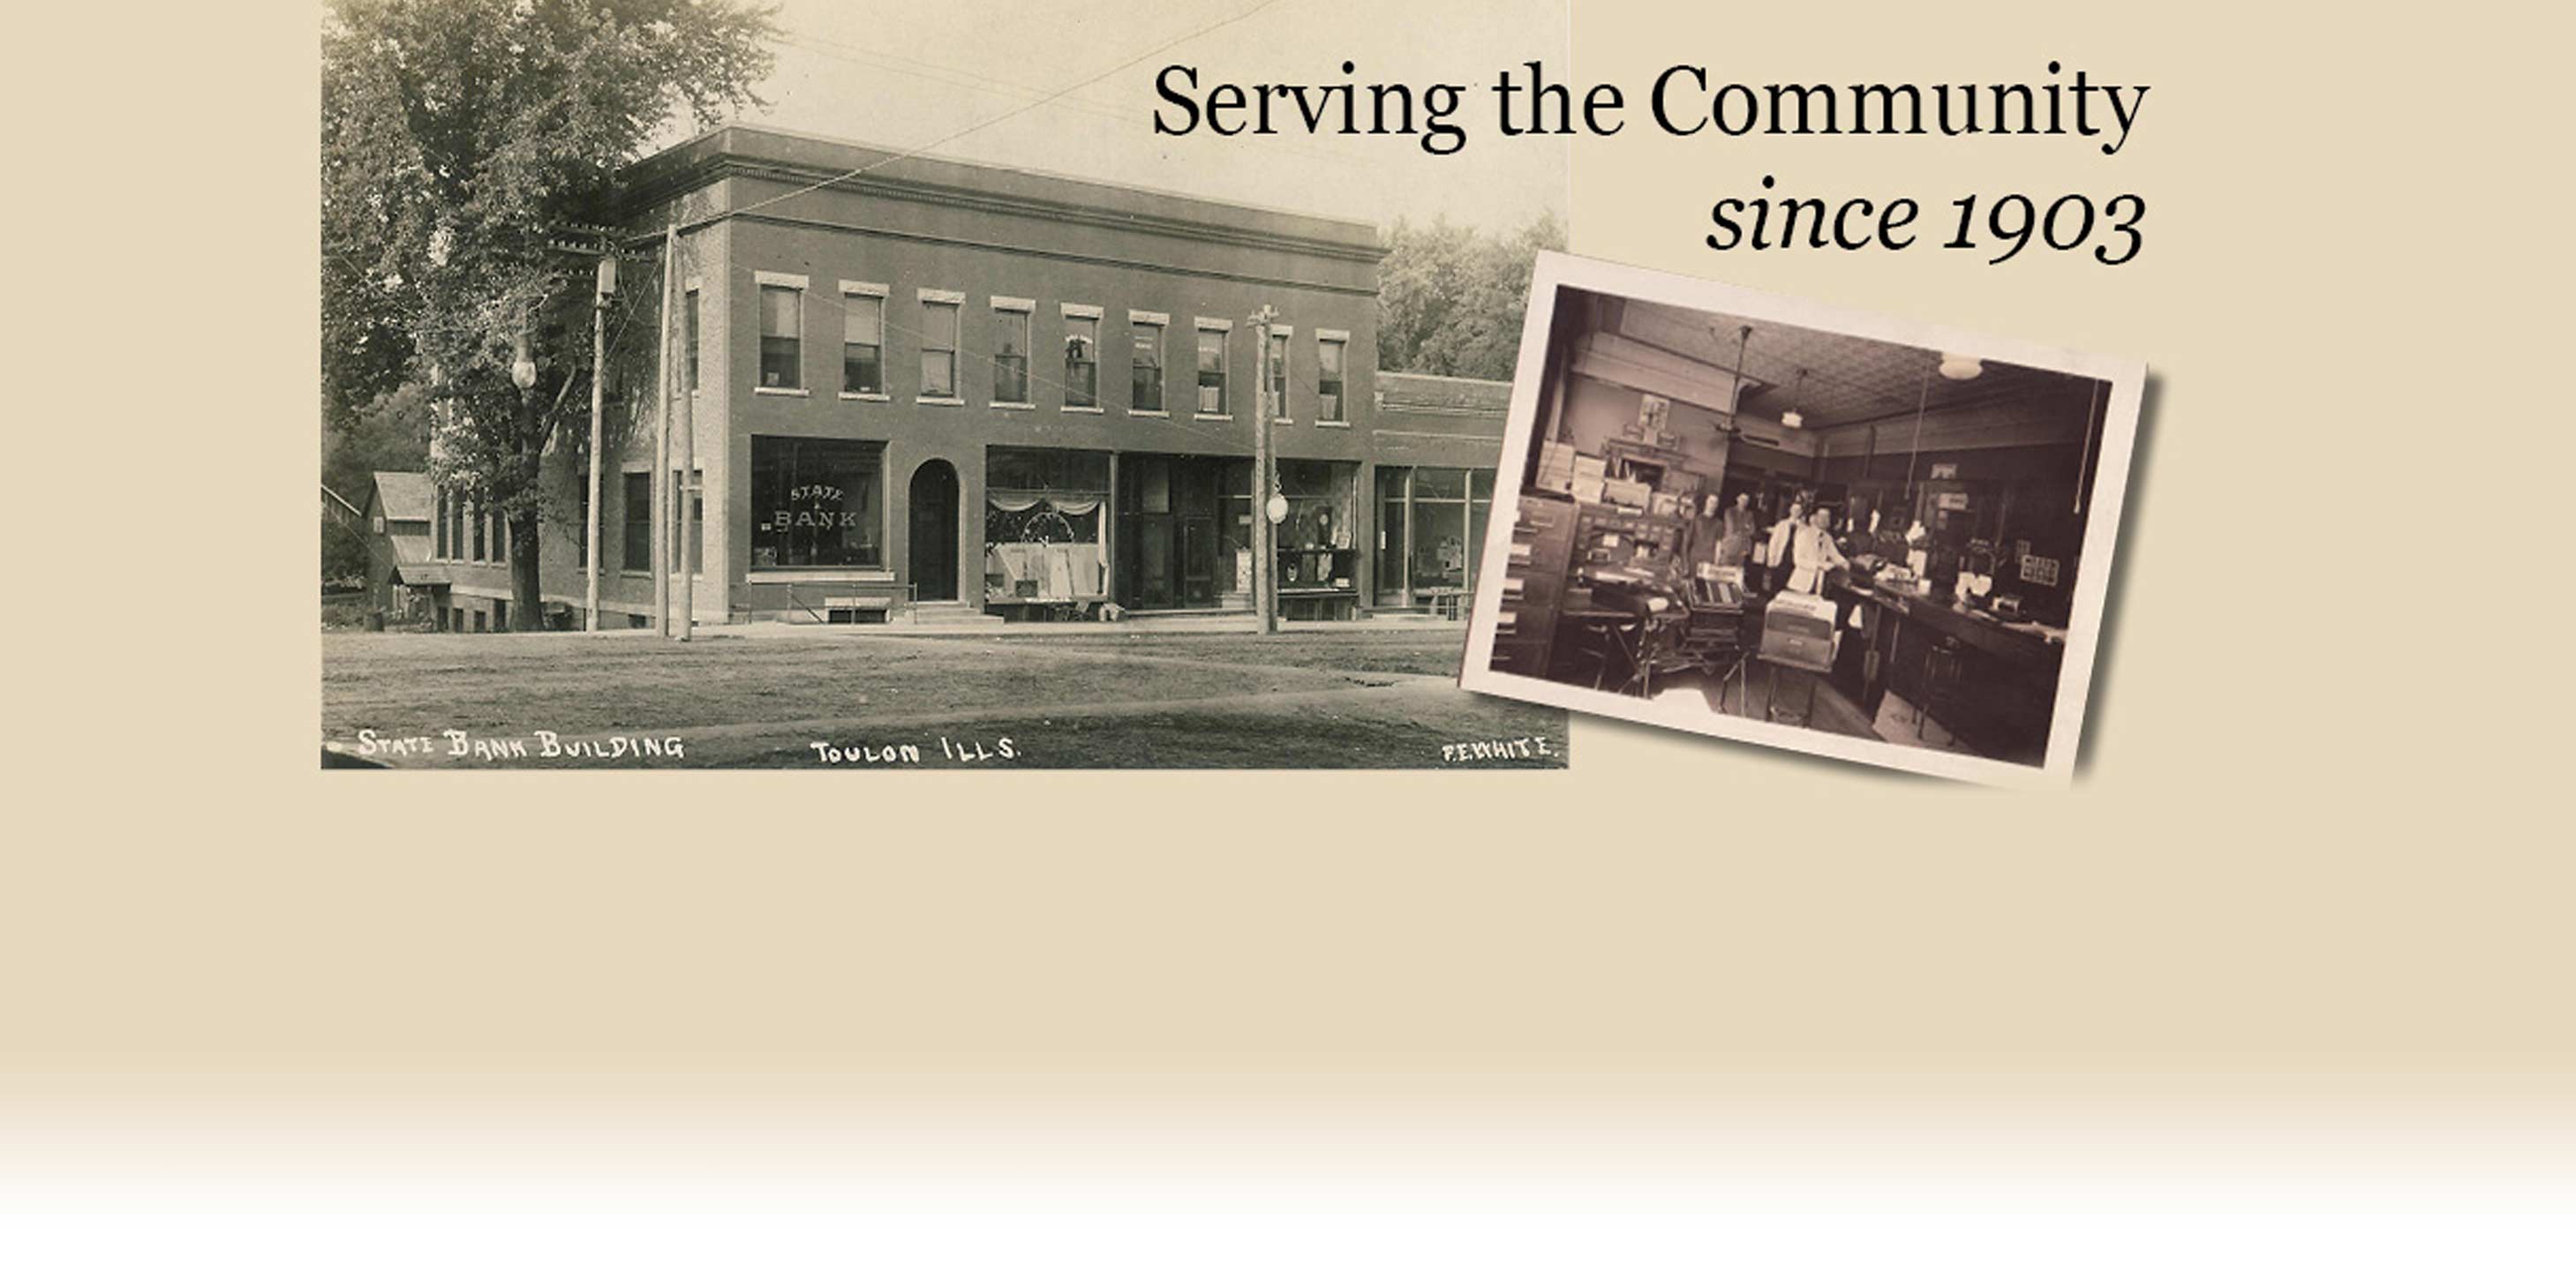 Serving the community since 1903